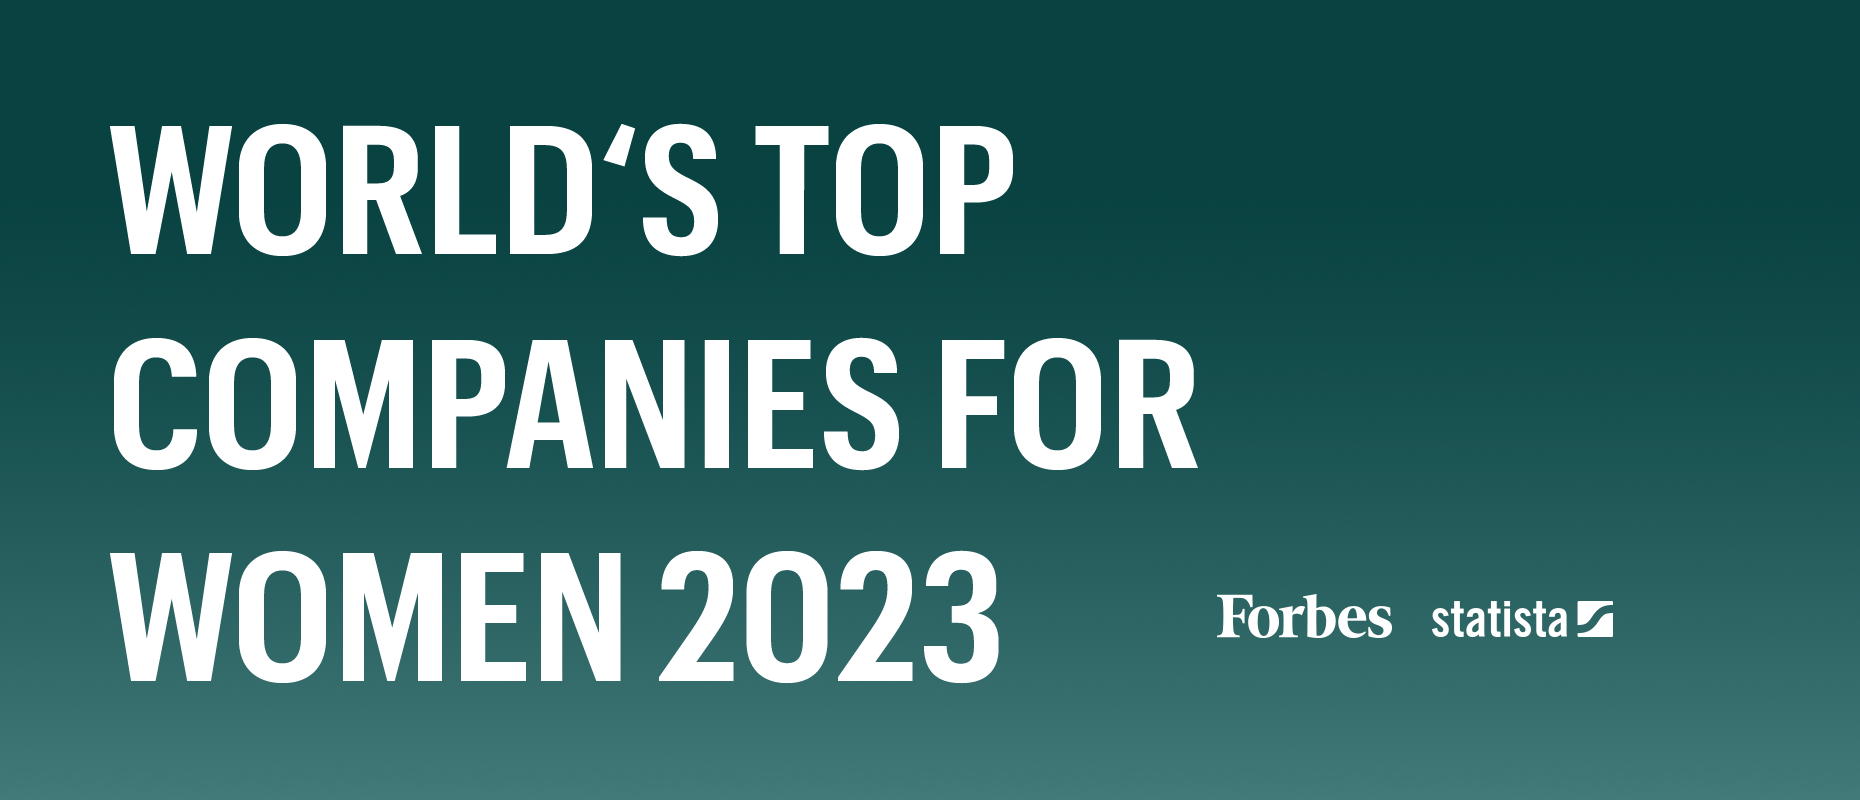 Arcadis named by Forbes as one of the Top Female Friendly Companies in the World